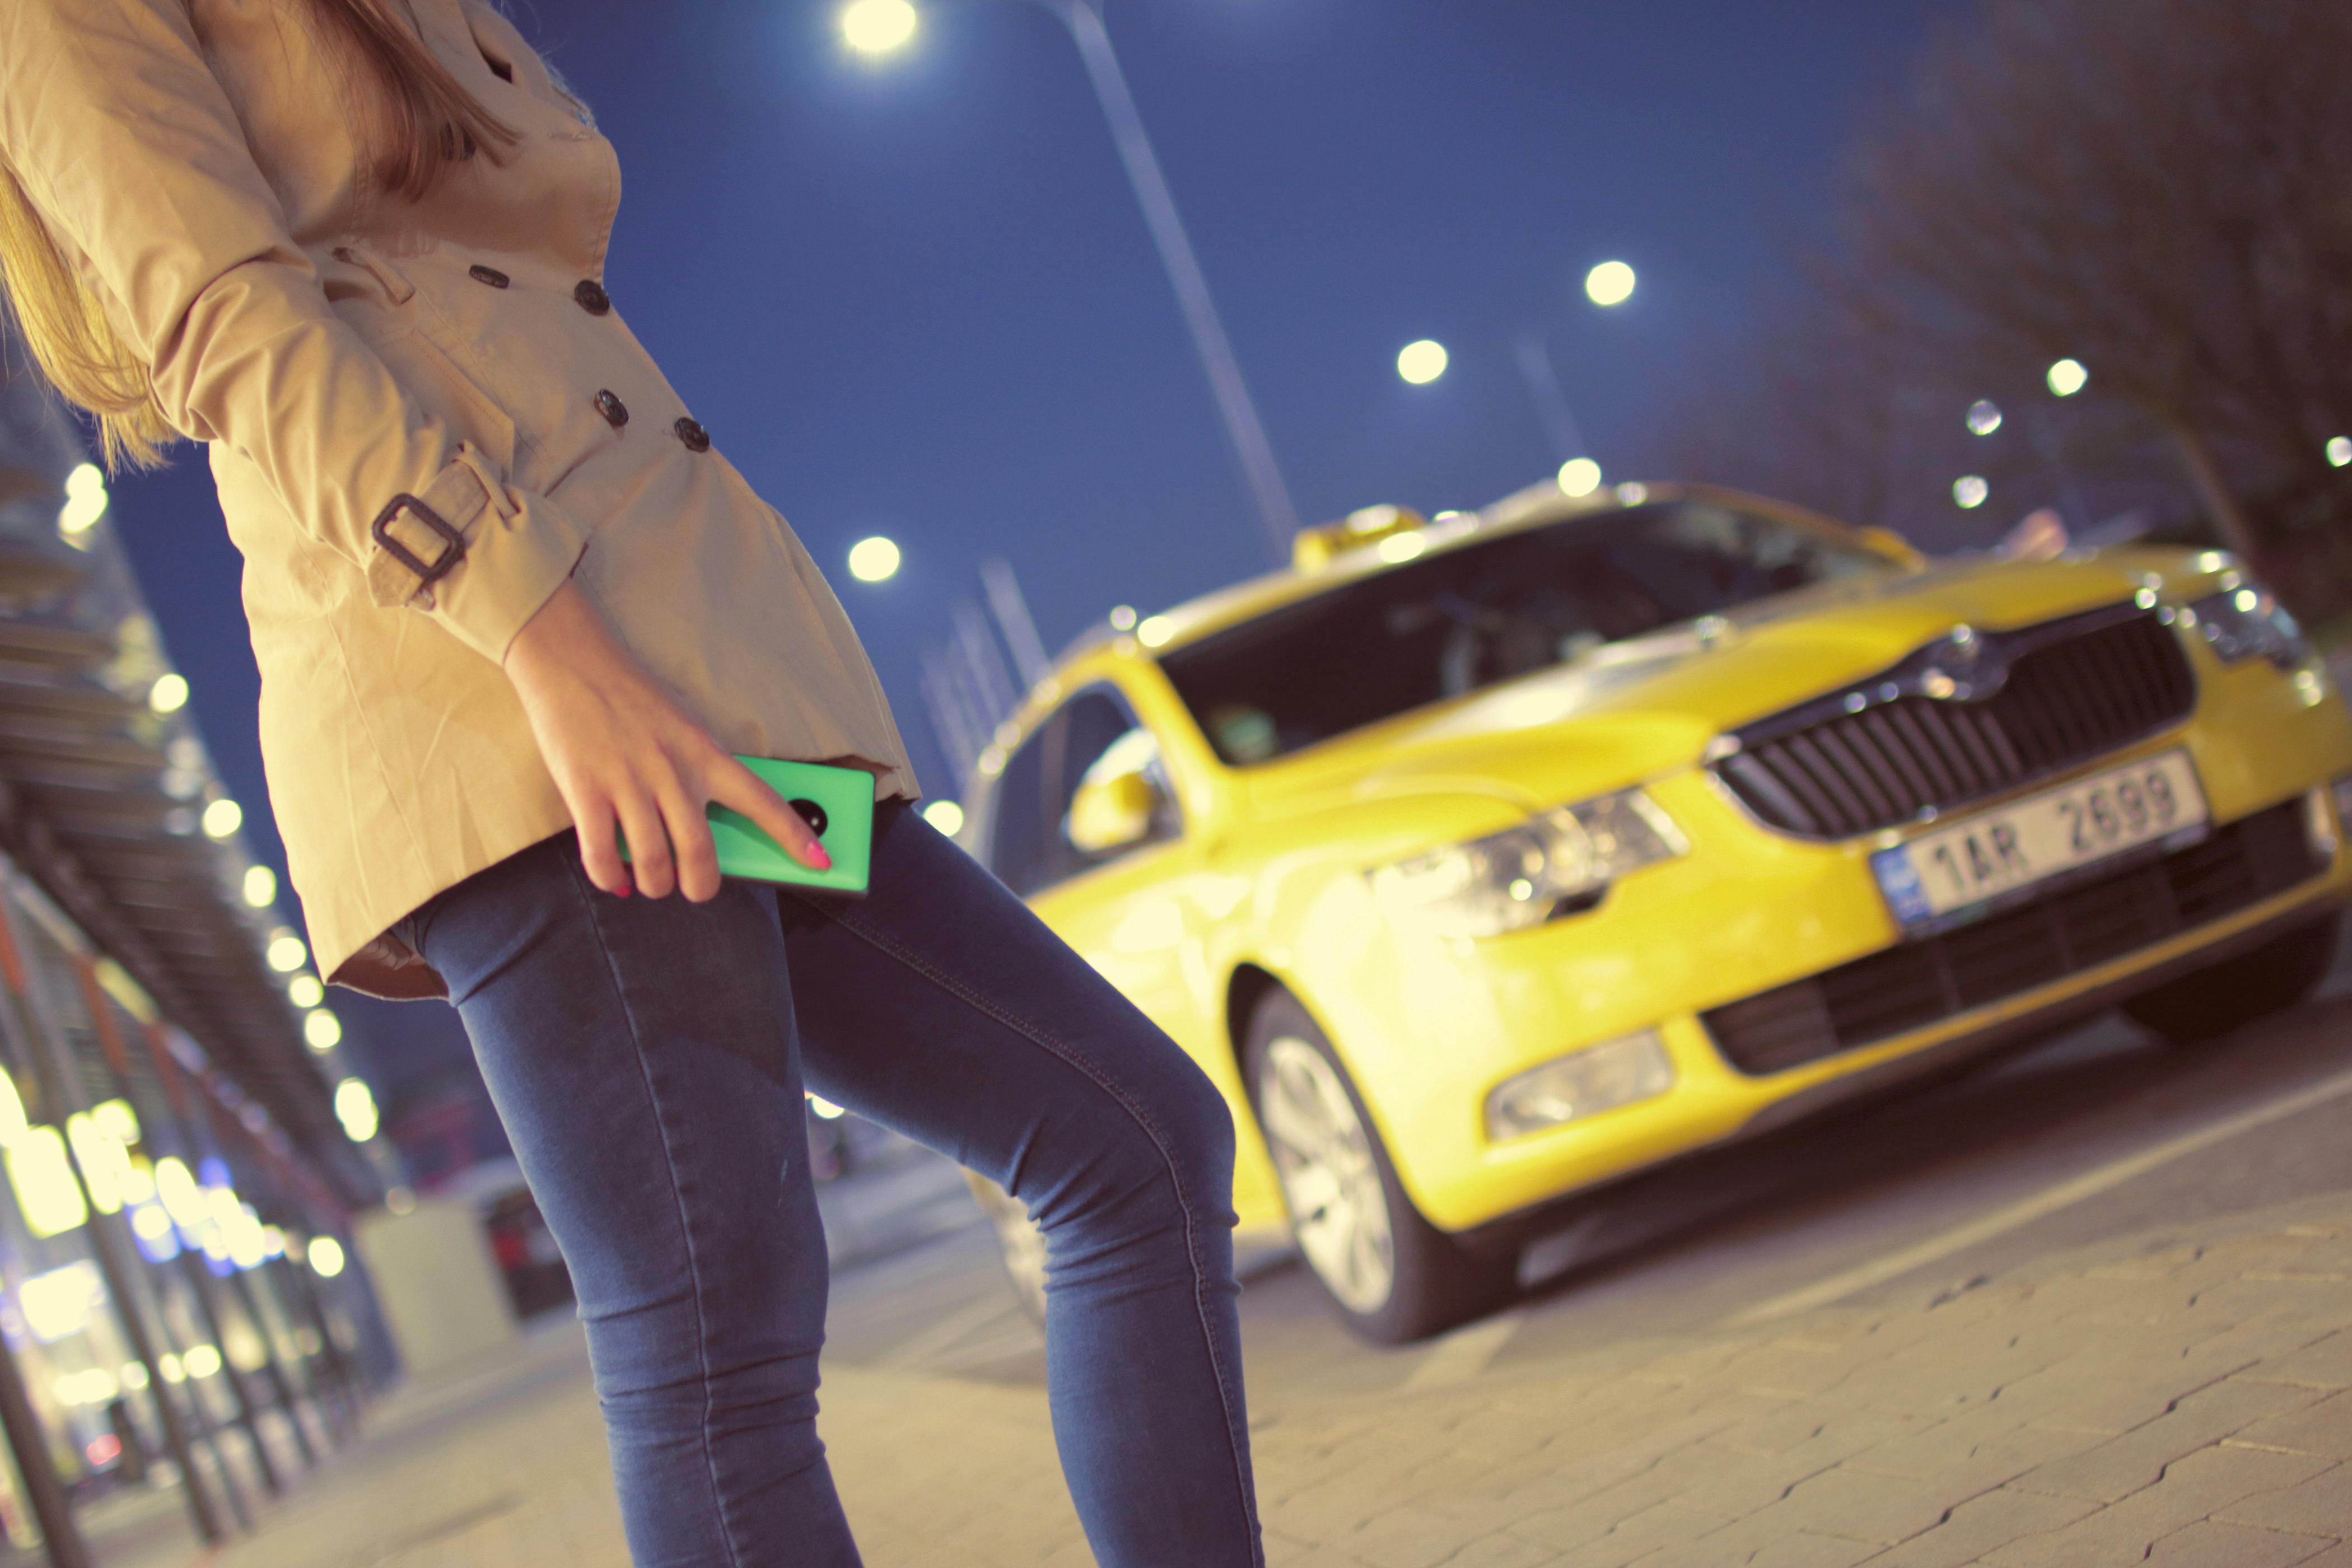 Olivia hailing a cab, ready to move on | Source: Pexels